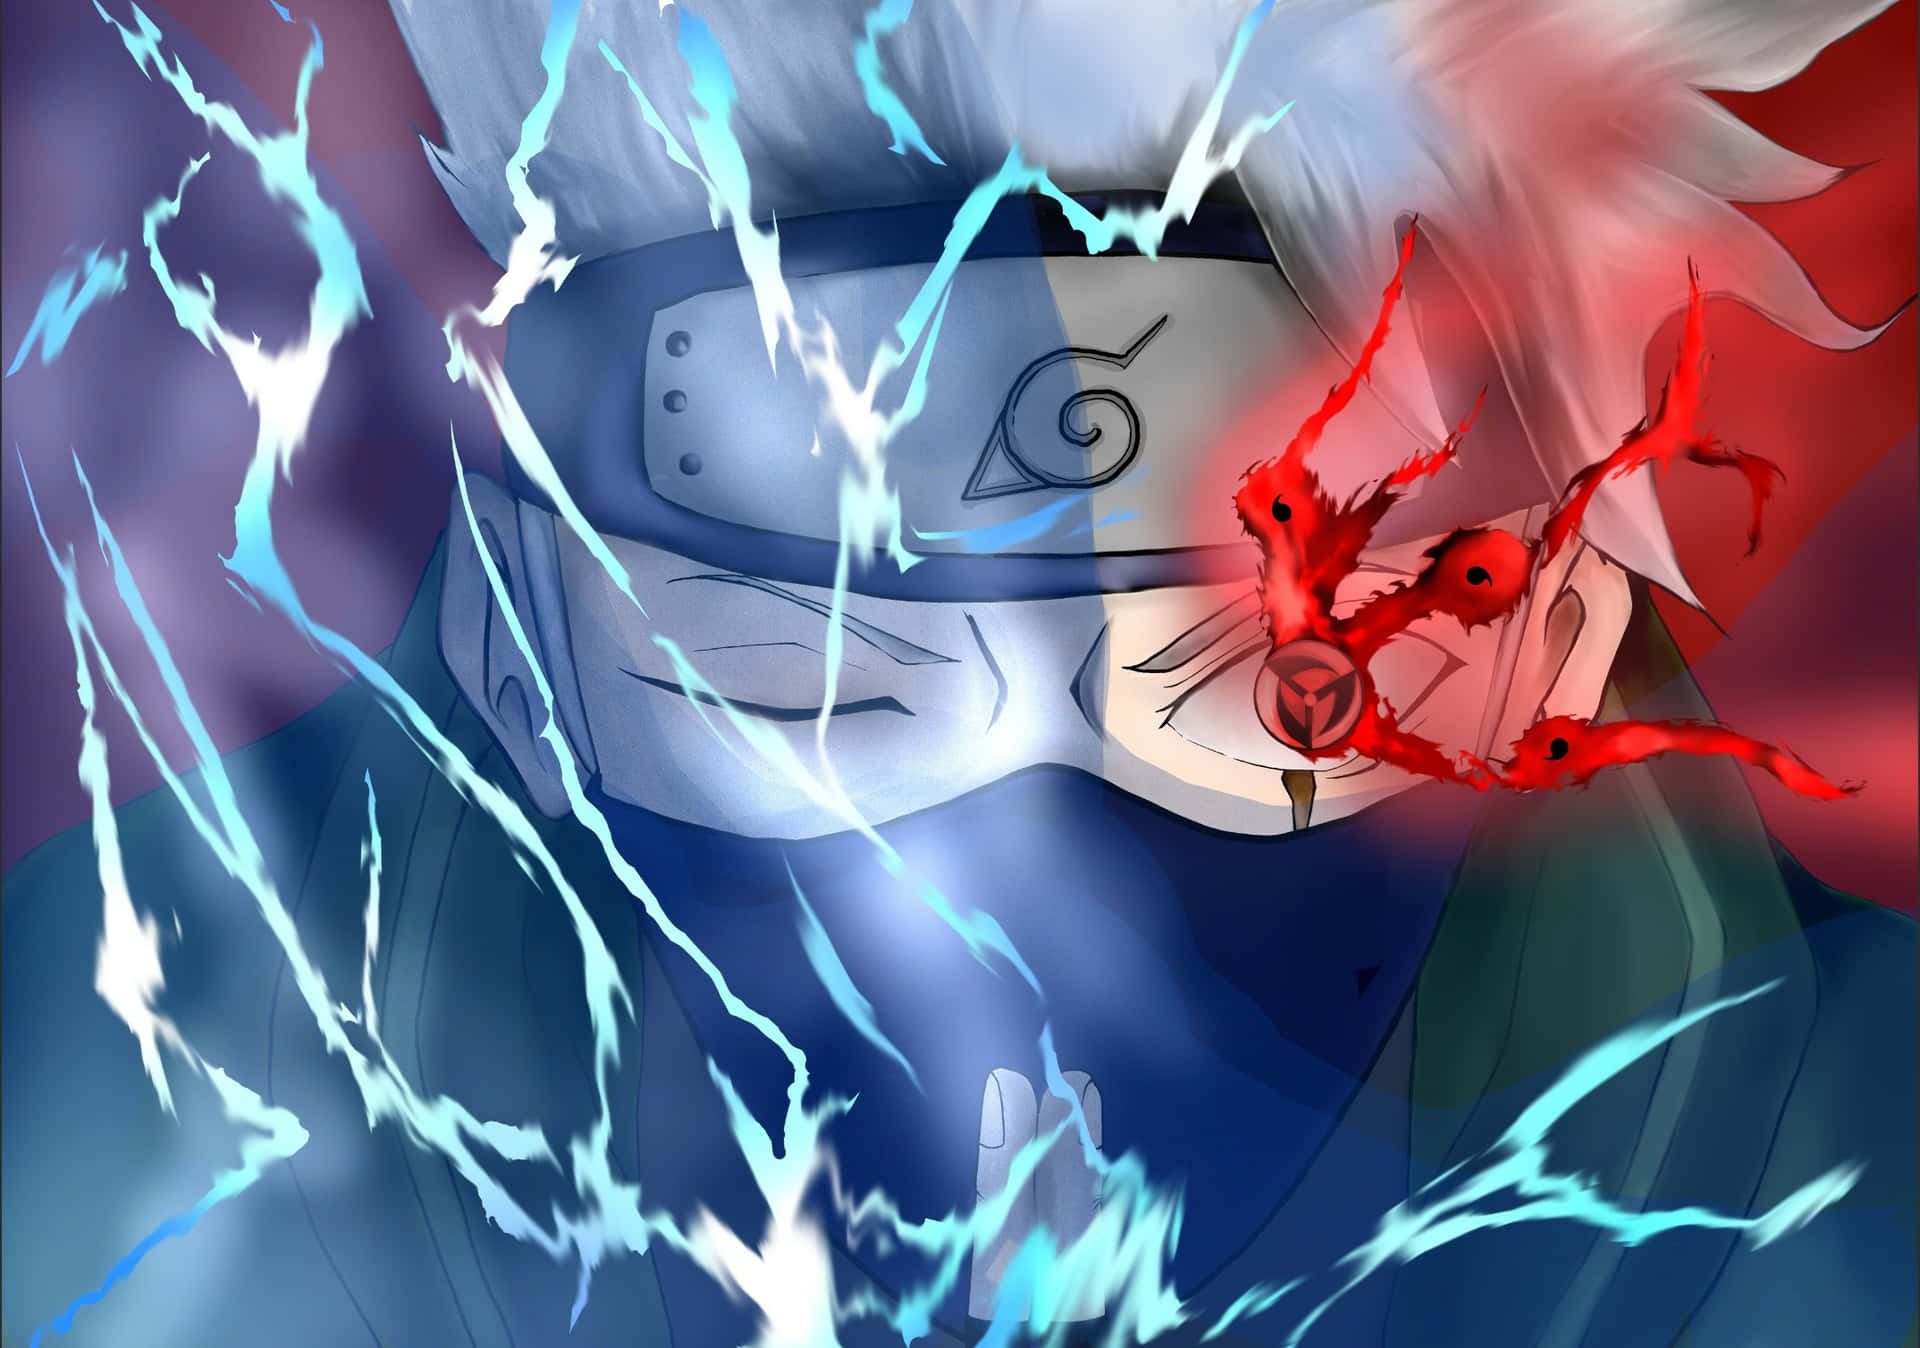 An epic moment featuring the brave and wise ninja, Kakashi